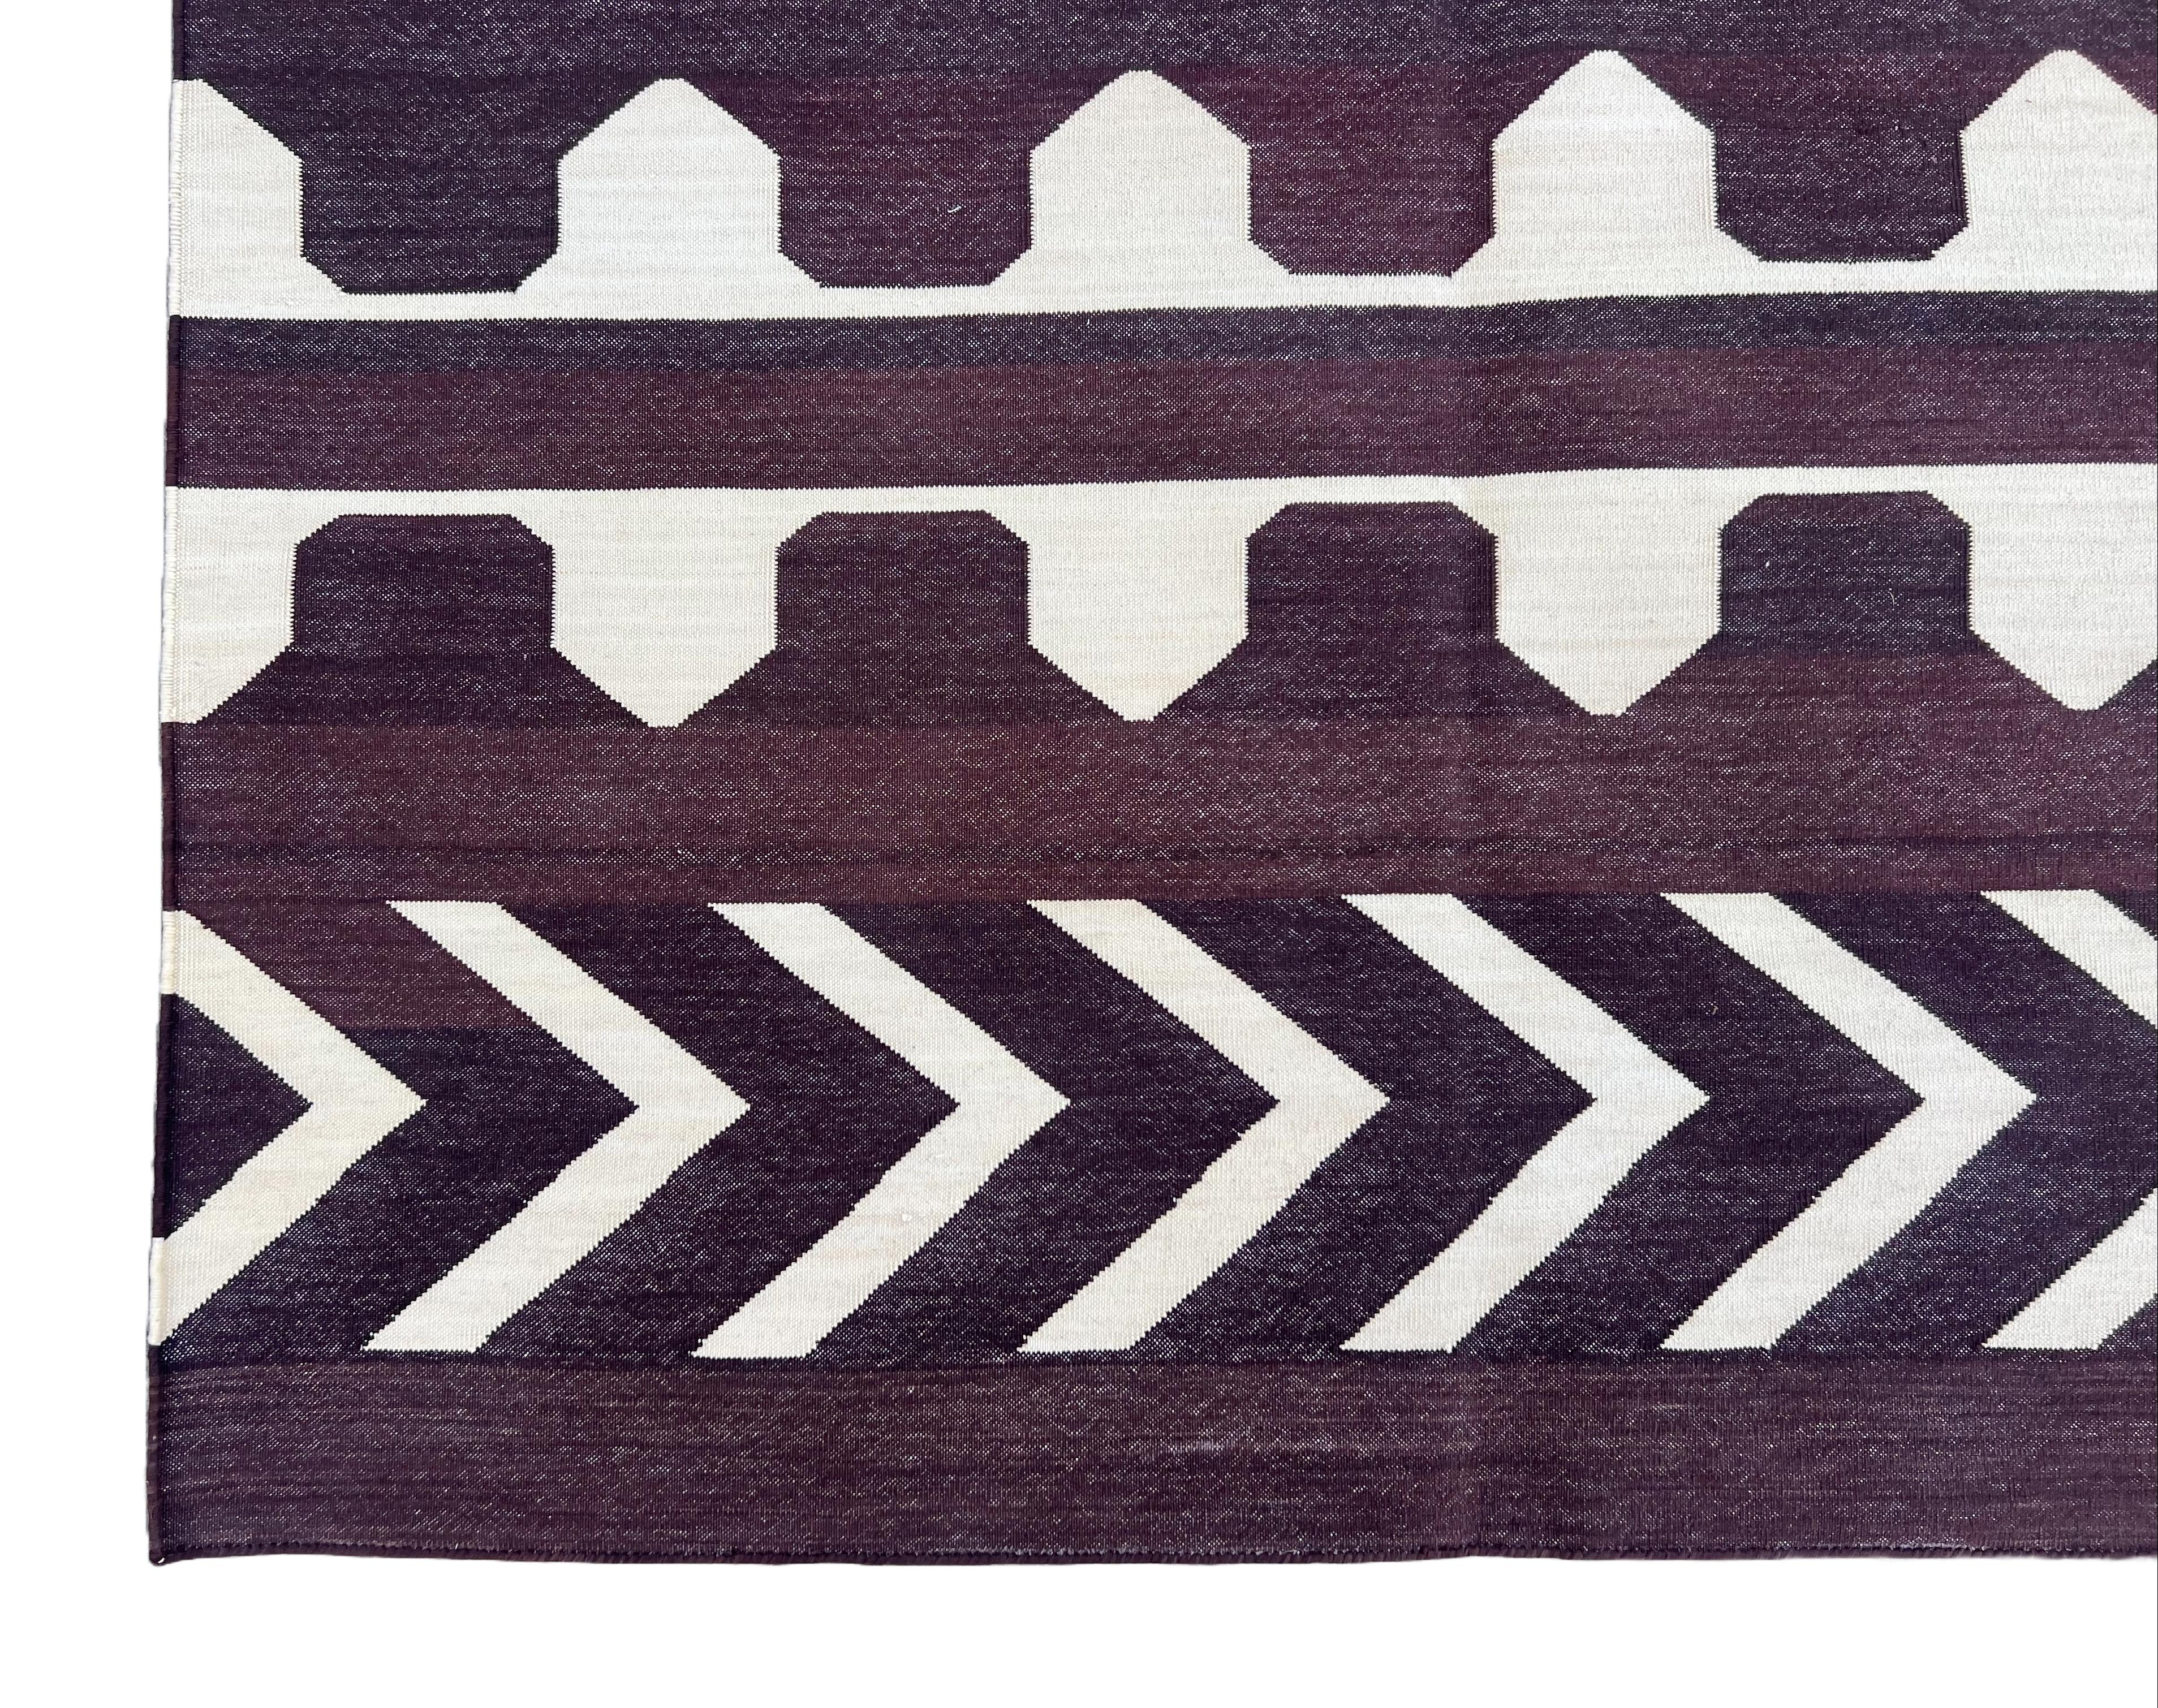 Cotton Vegetable Dyed Reversible Coffee Brown And Cream Geometric Indian Rug - 8'x10'
These special flat-weave dhurries are hand-woven with 15 ply 100% cotton yarn. Due to the special manufacturing techniques used to create our rugs, the size and